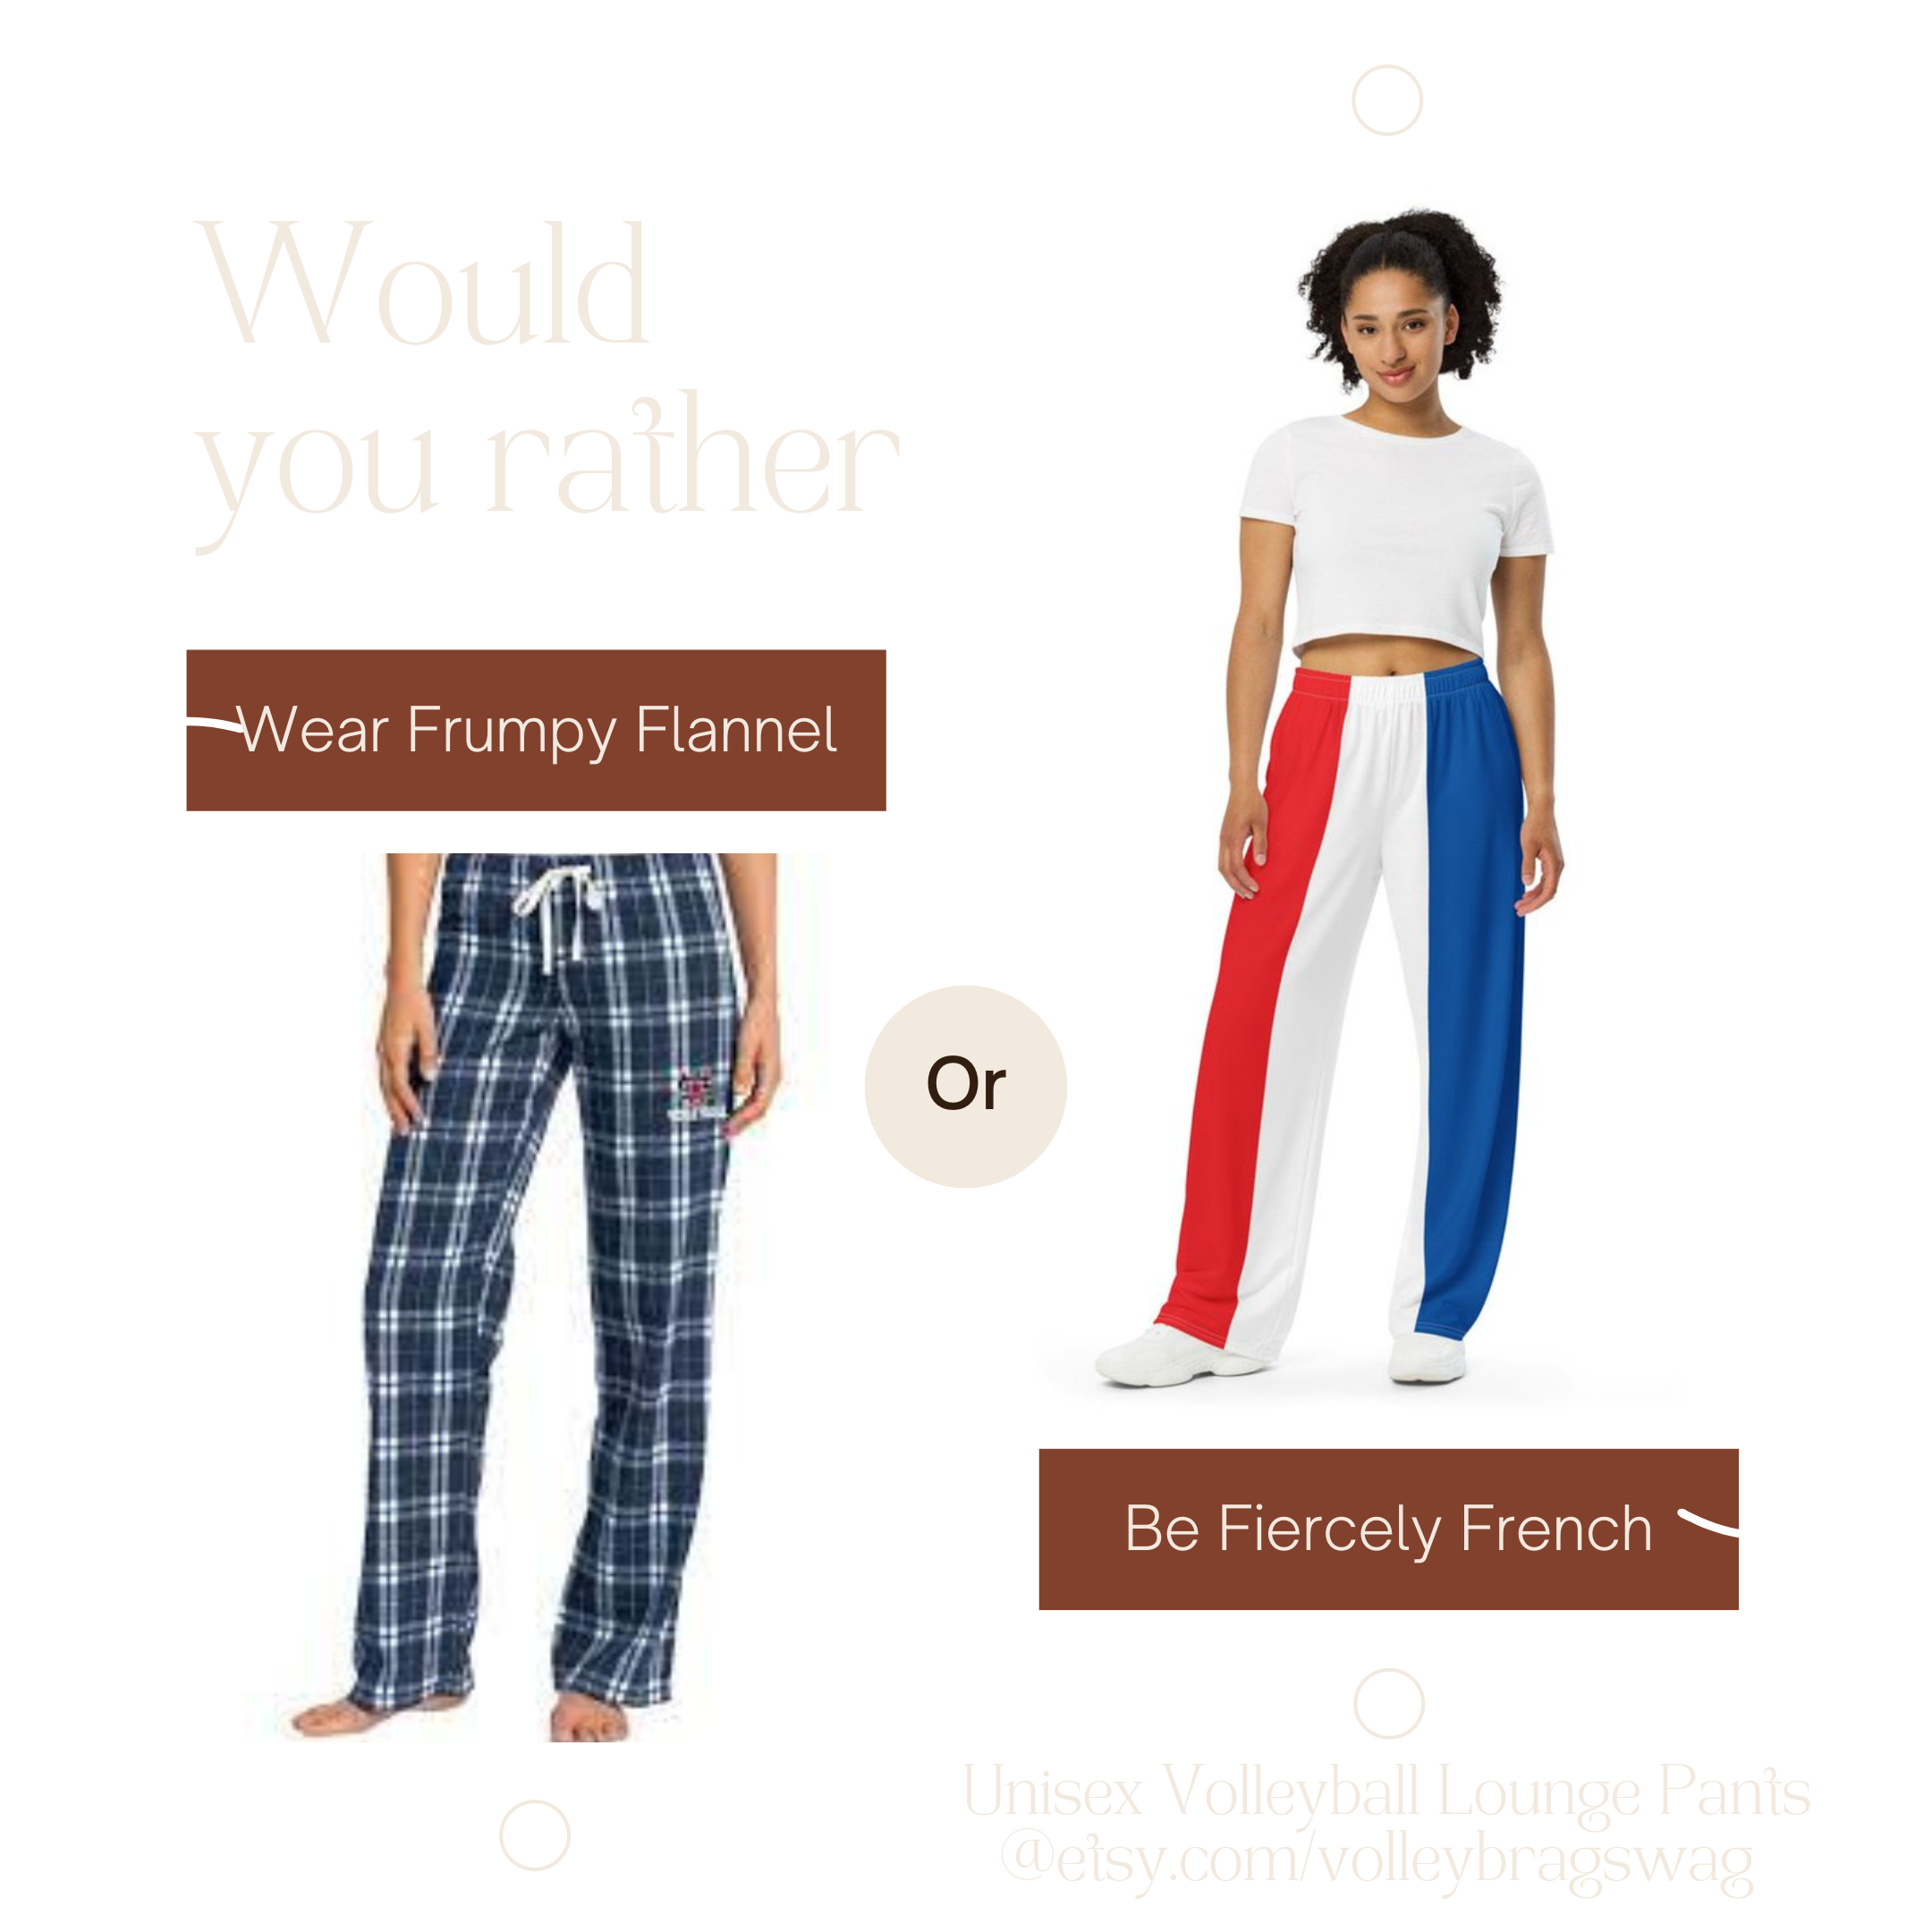 Plus, these wide leg pajama pants aren't just stylish, they're also versatile!
You can use them as beach volleyball cover-up pants or even as yoga pants or like I do as workout pants.
And don't worry, guys, these wide leg pajama pants are unisex, so they're perfect for both male and female volleyball players.